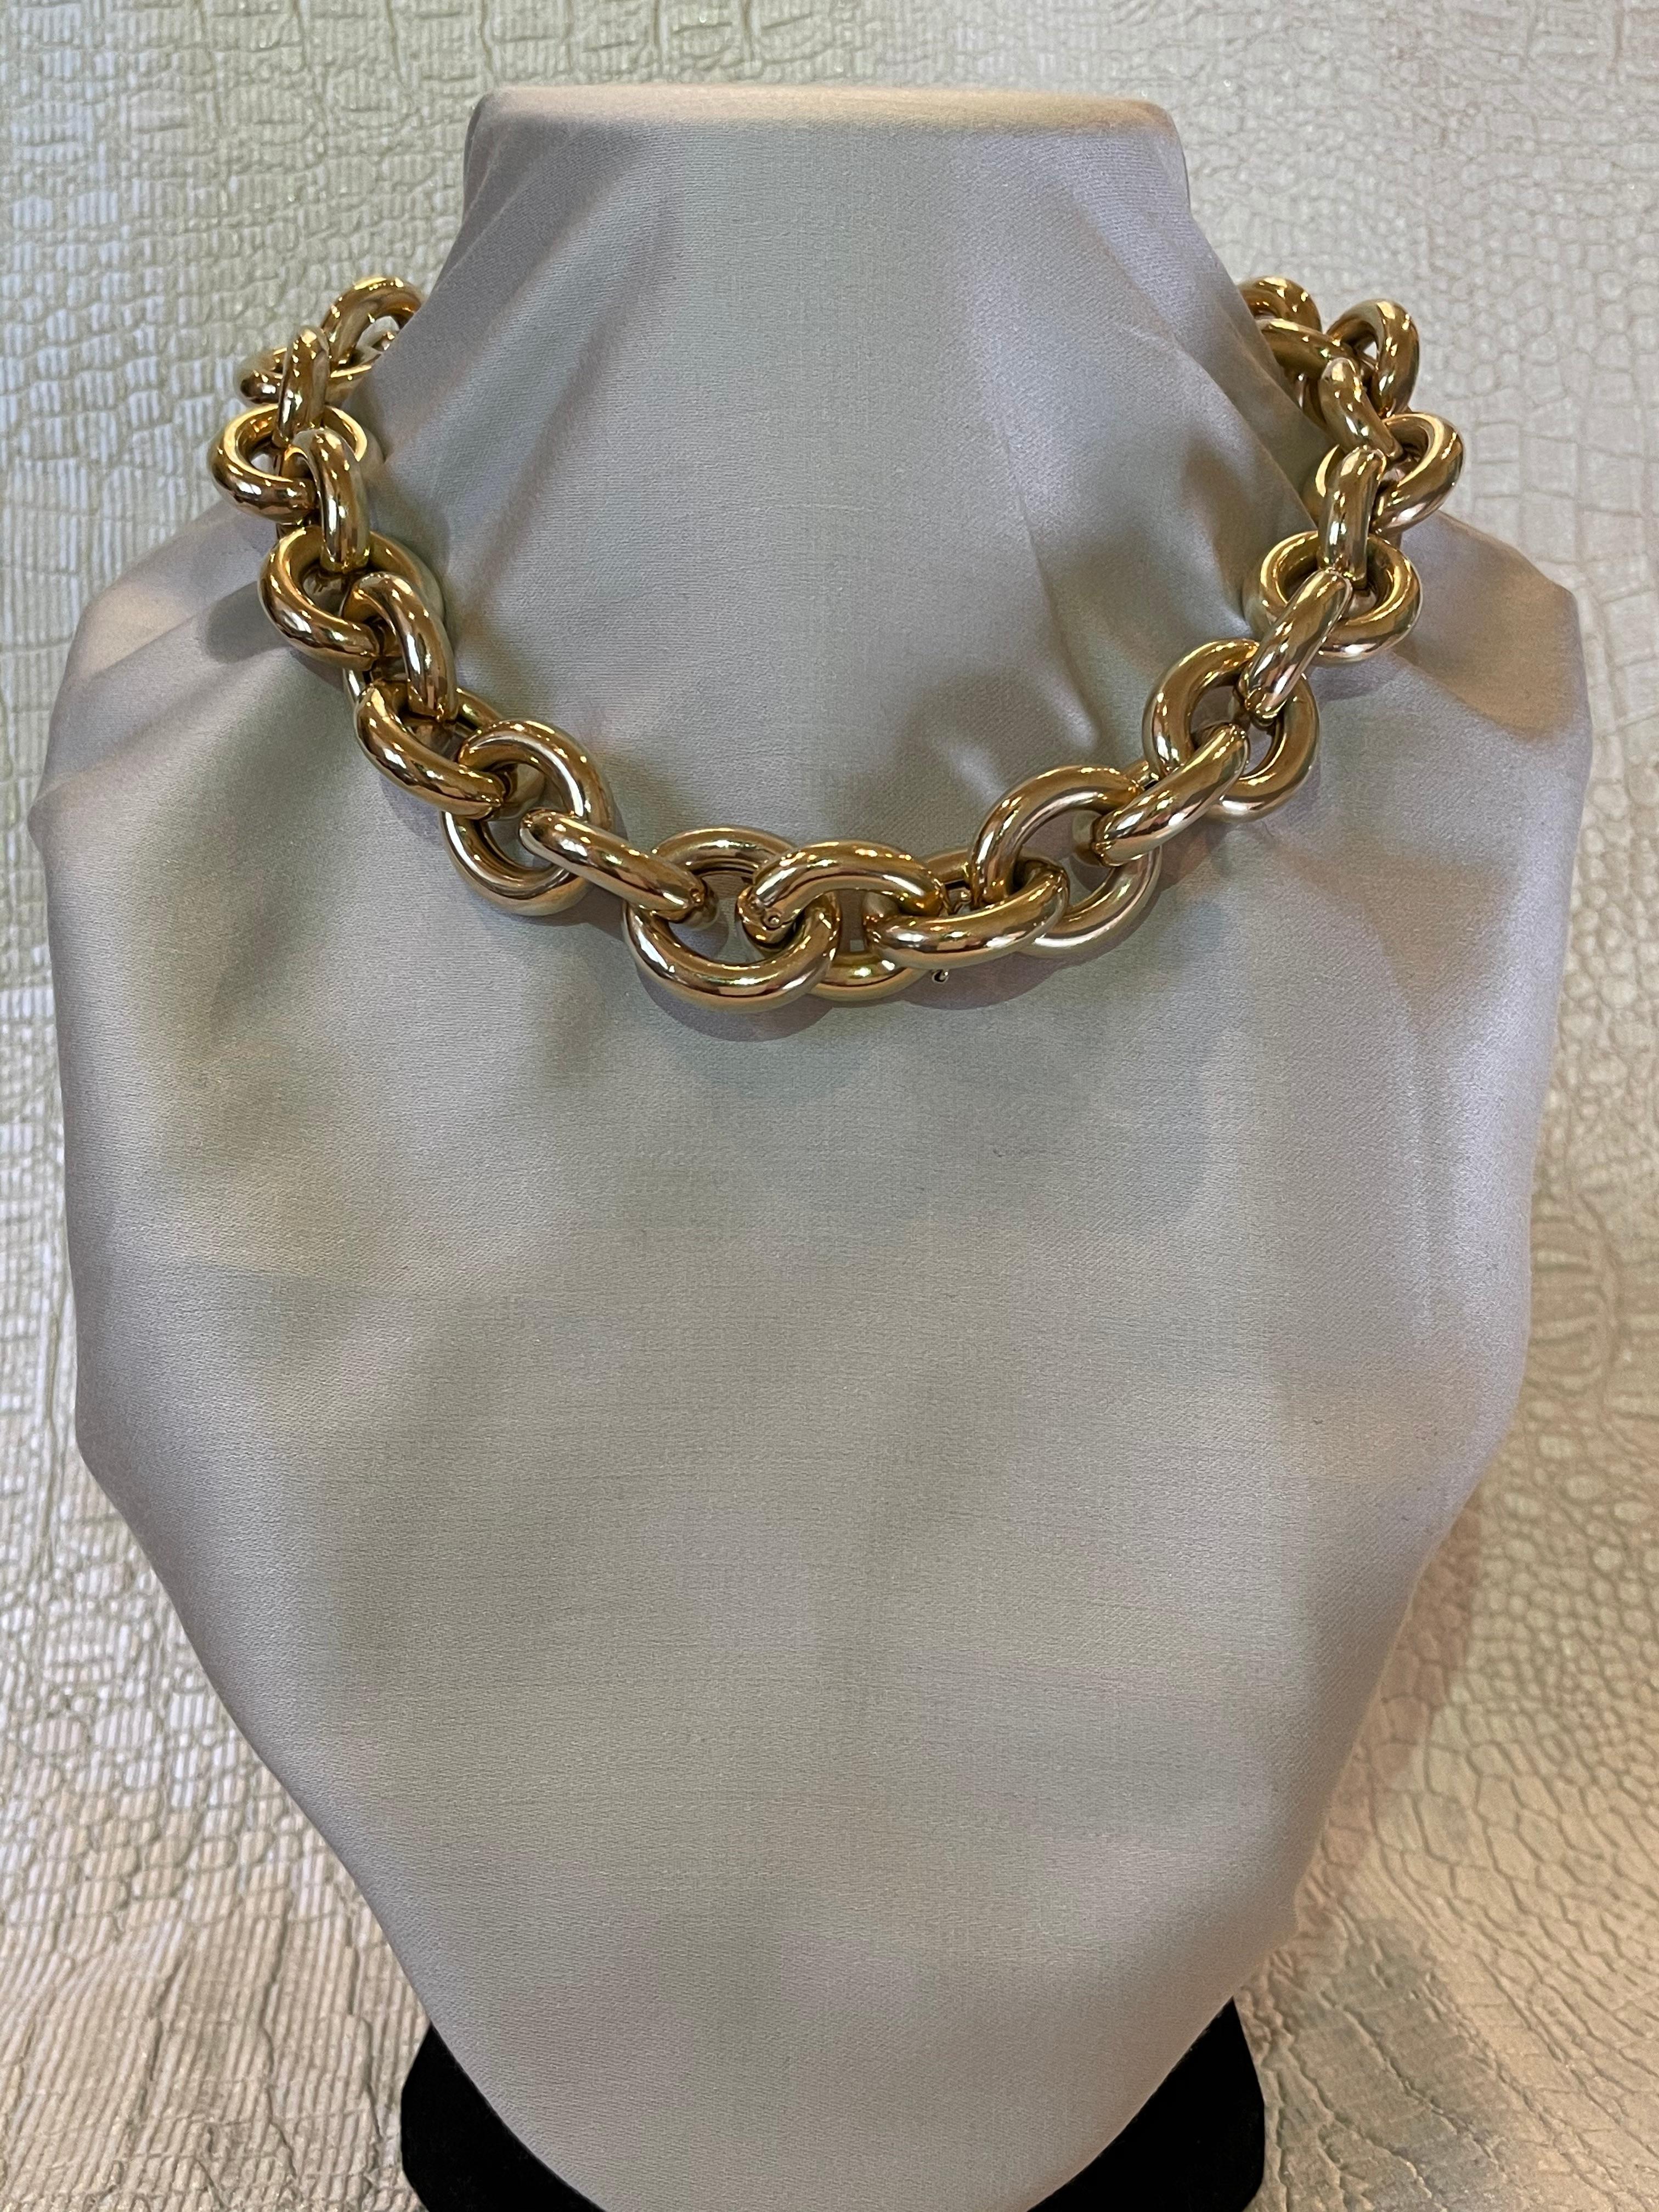 Italian Made by Micheletto Yellow Gold Link Bracelet or Necklace.  This stunning link necklace or bracelet combination screams class and makes a statement.  This classic piece transitions day to night.  This is 18K Gold Overlay, over sterling